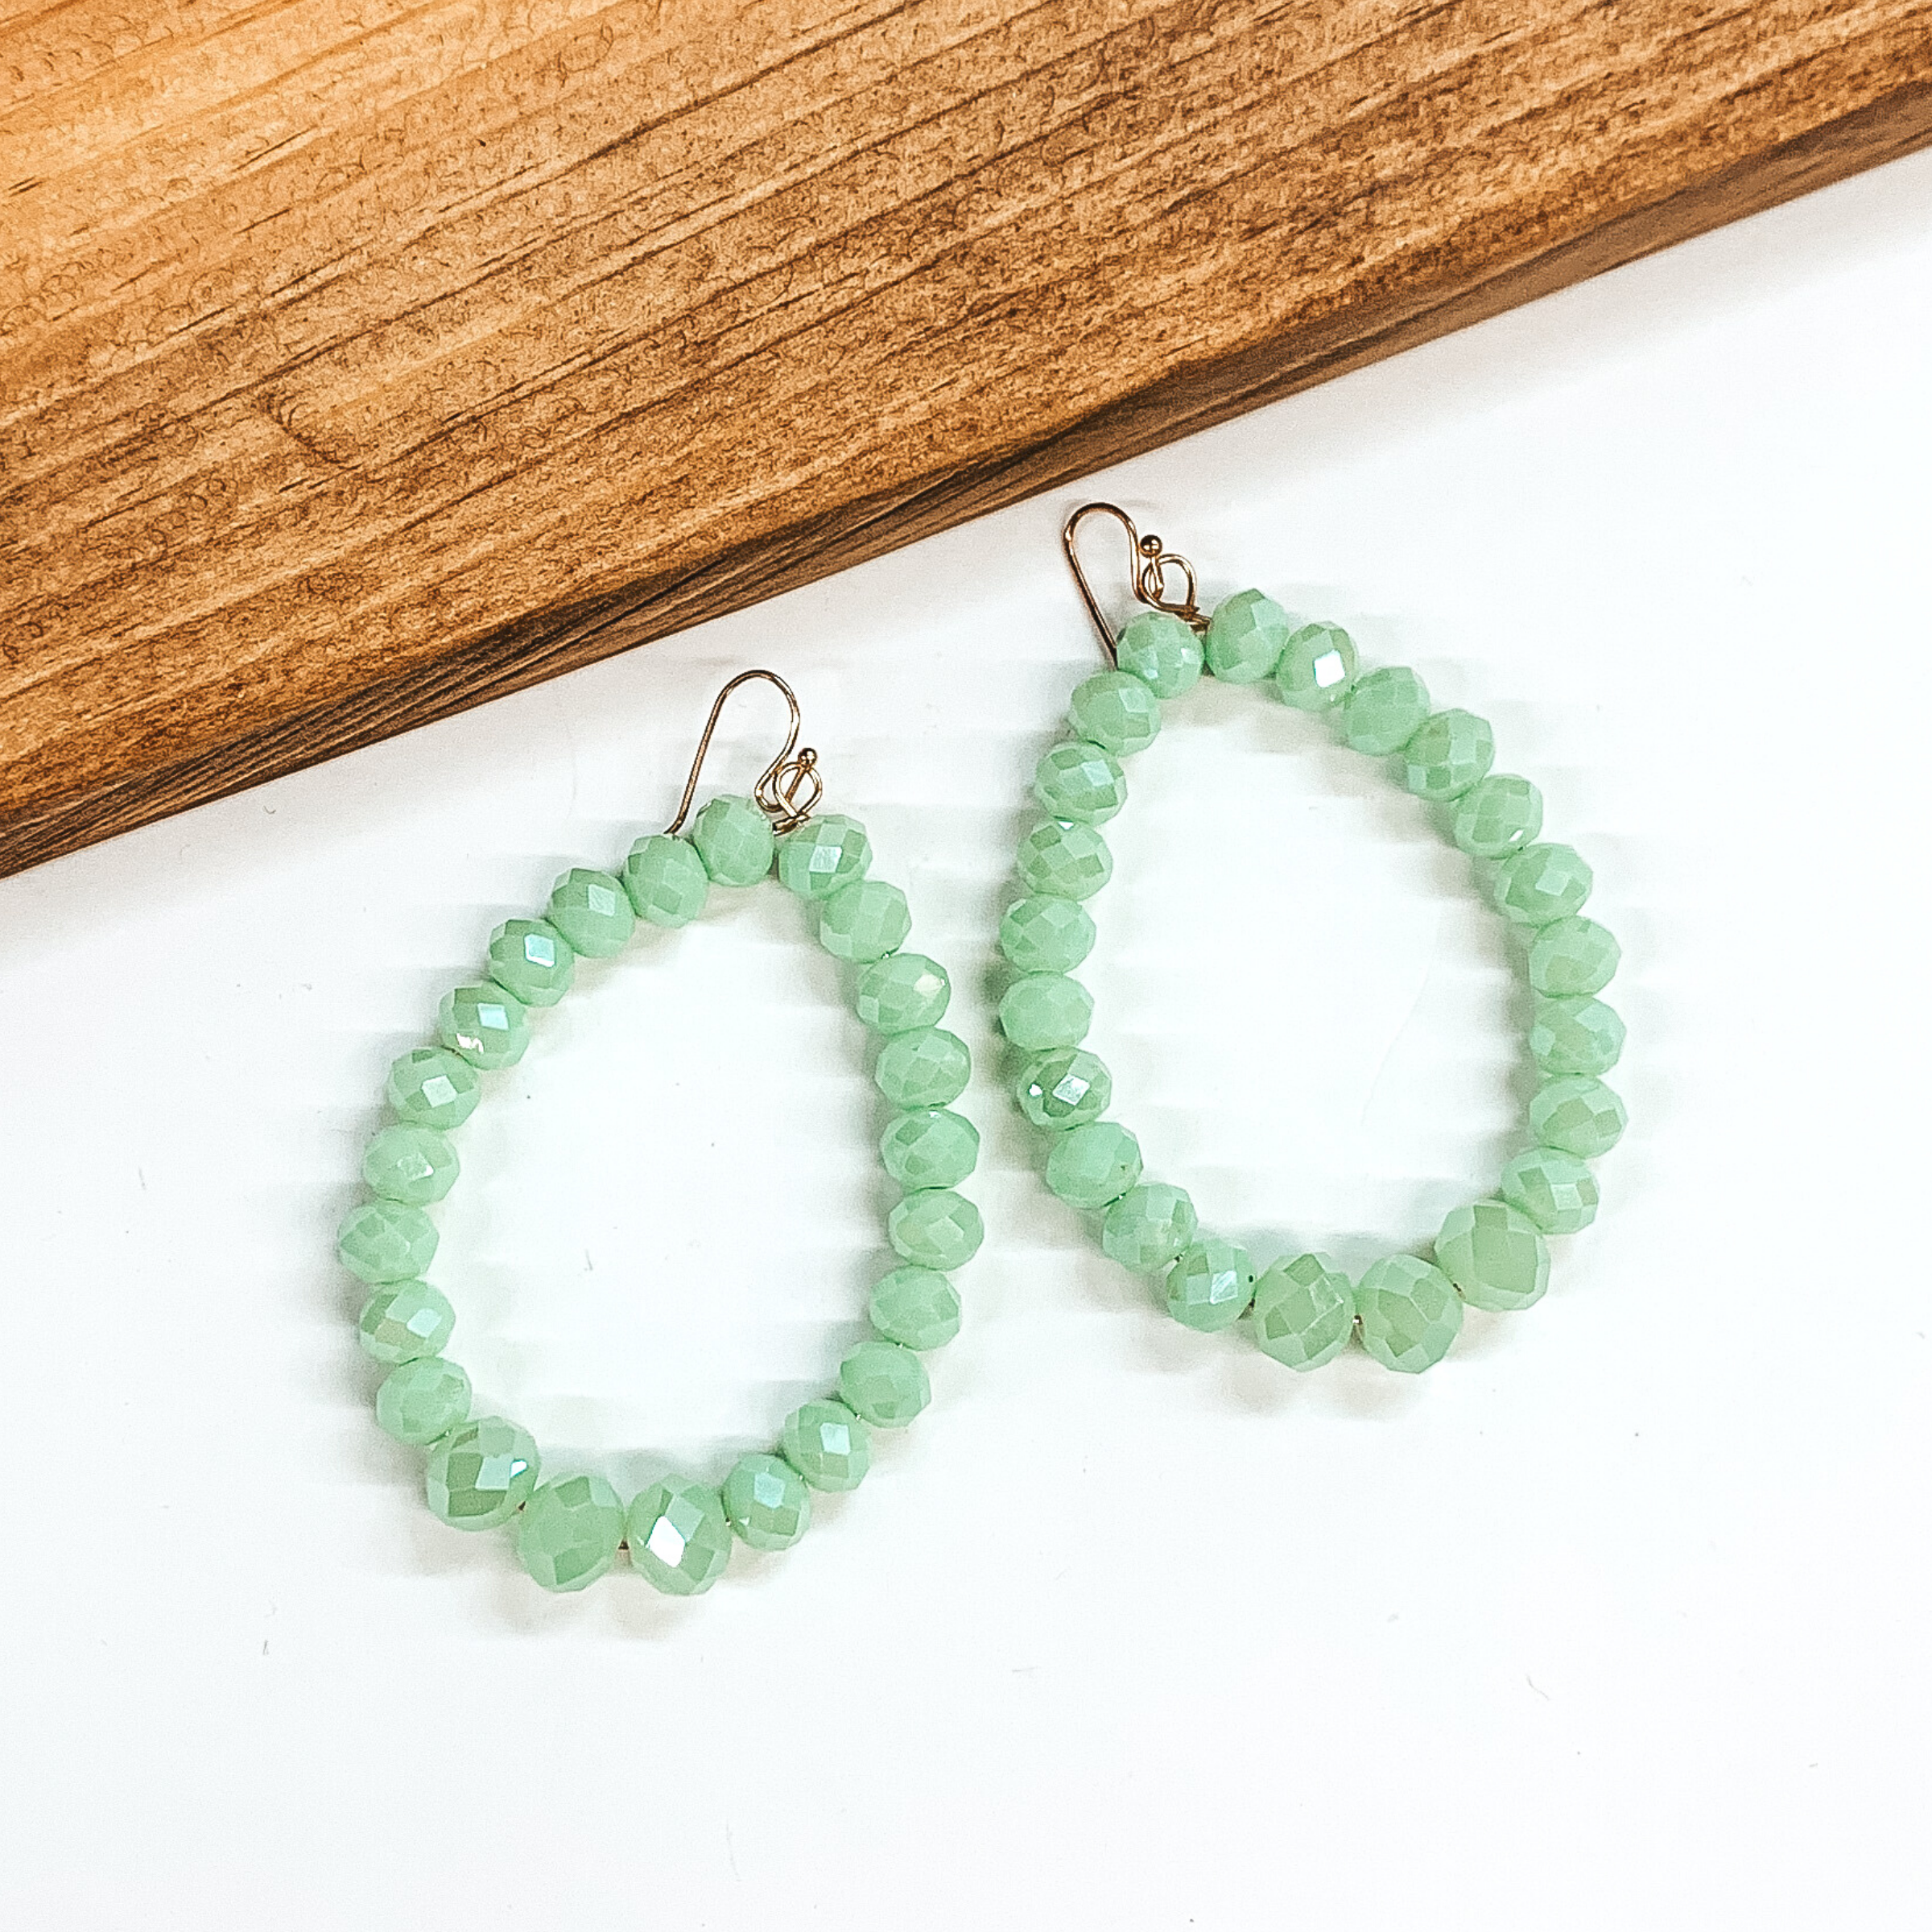 Crystal beaded open teardrop earrings in mint. These earrings are pictured on a white background with a brown block at the top left corner.